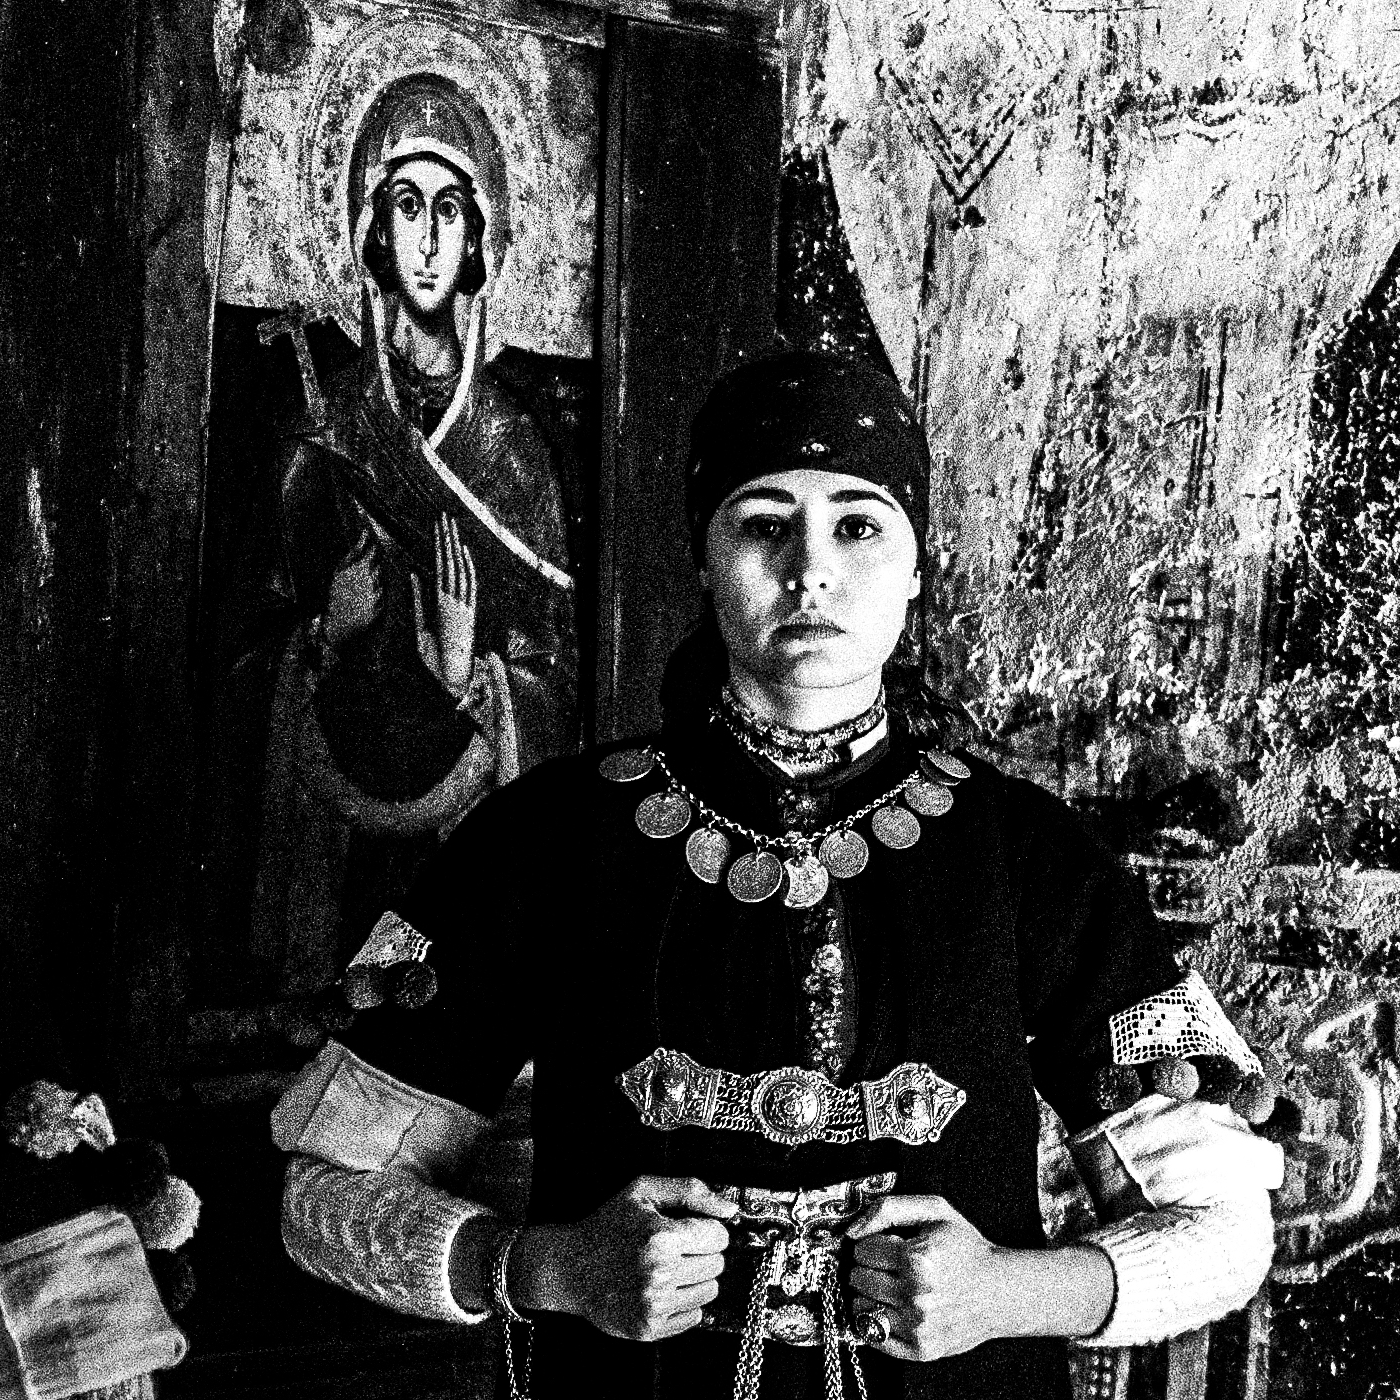 Black and White Photography Wall Art Greece | Costumes of Prespes at a local church W. Macedonia by George Tatakis - detailed view